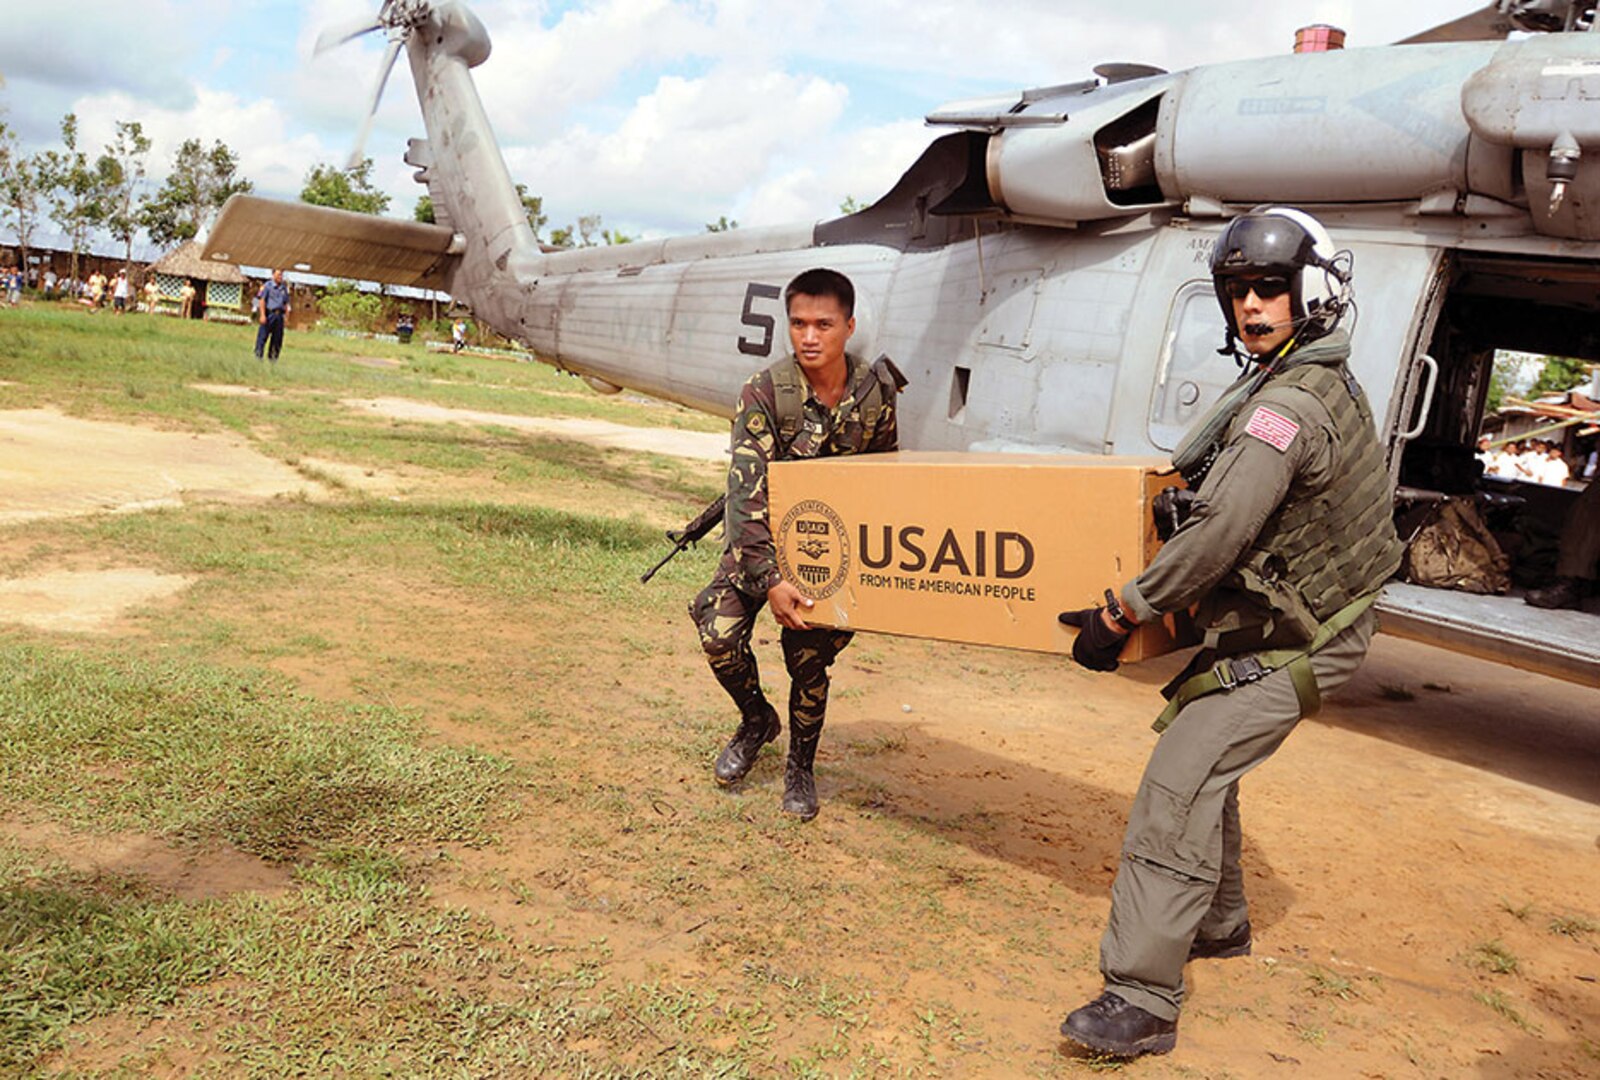 A U.S. Navy sailor and an Armed Forces Philippines soldier unload a box of humanitarian aid from USAID on Panay Island, demonstrating interagency and international cooperation.